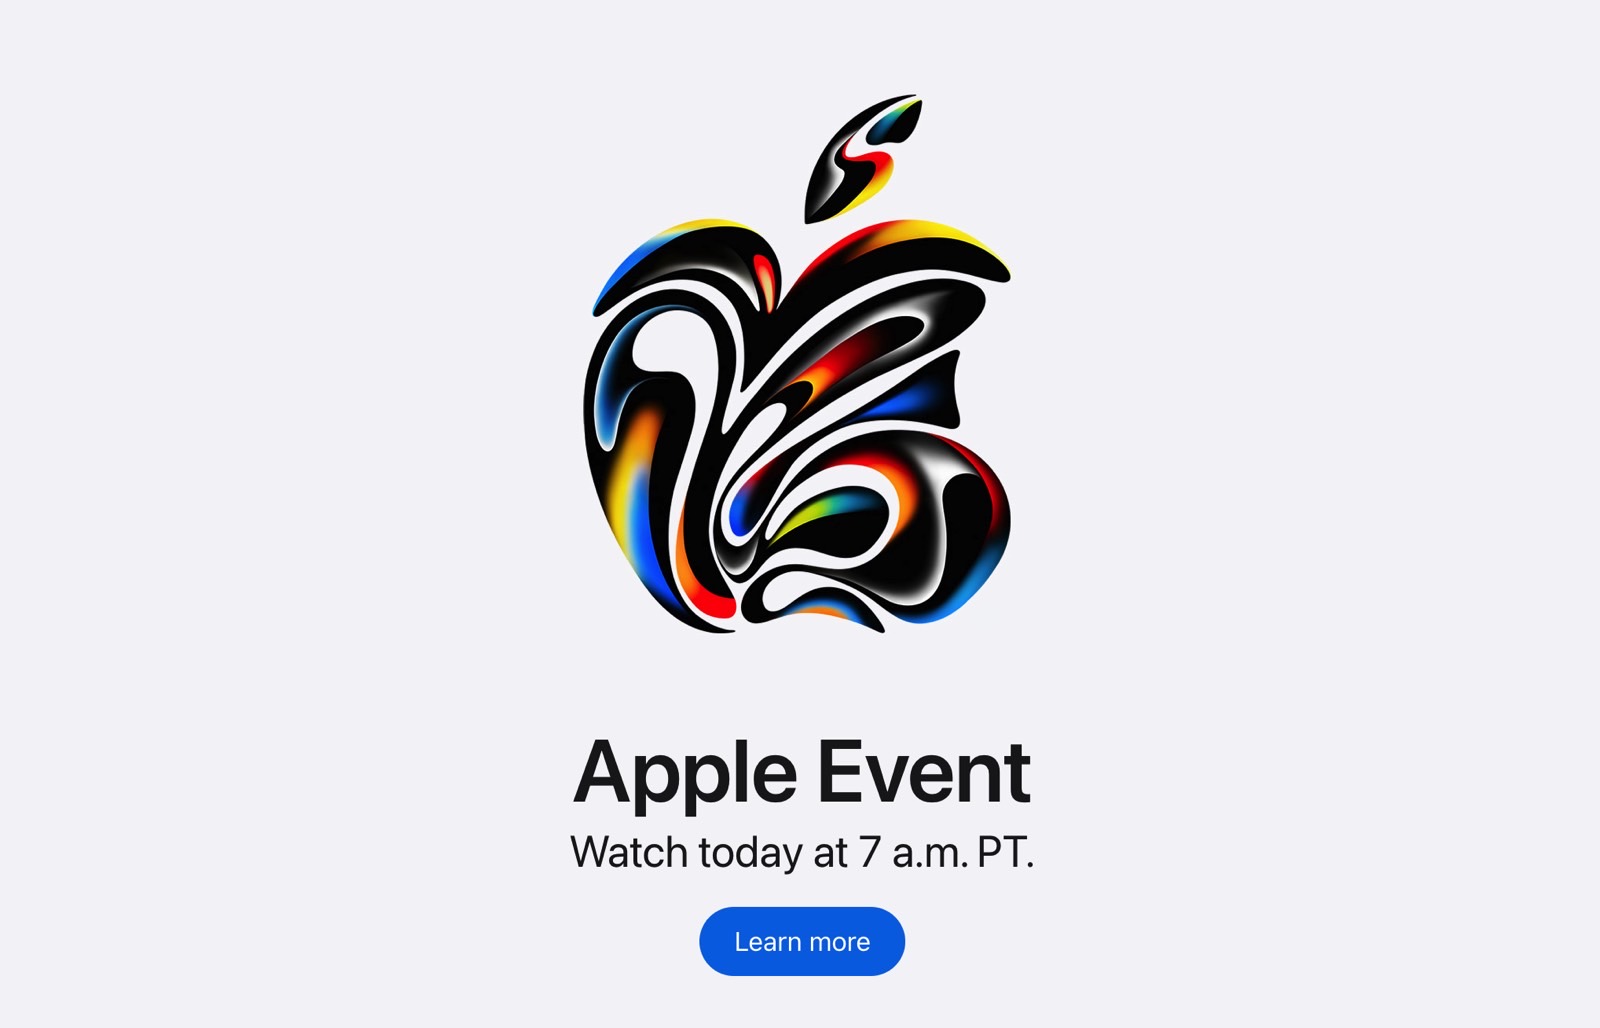 One of the erasable logos Apple used on its website ahead of the OLED iPad Pro event.